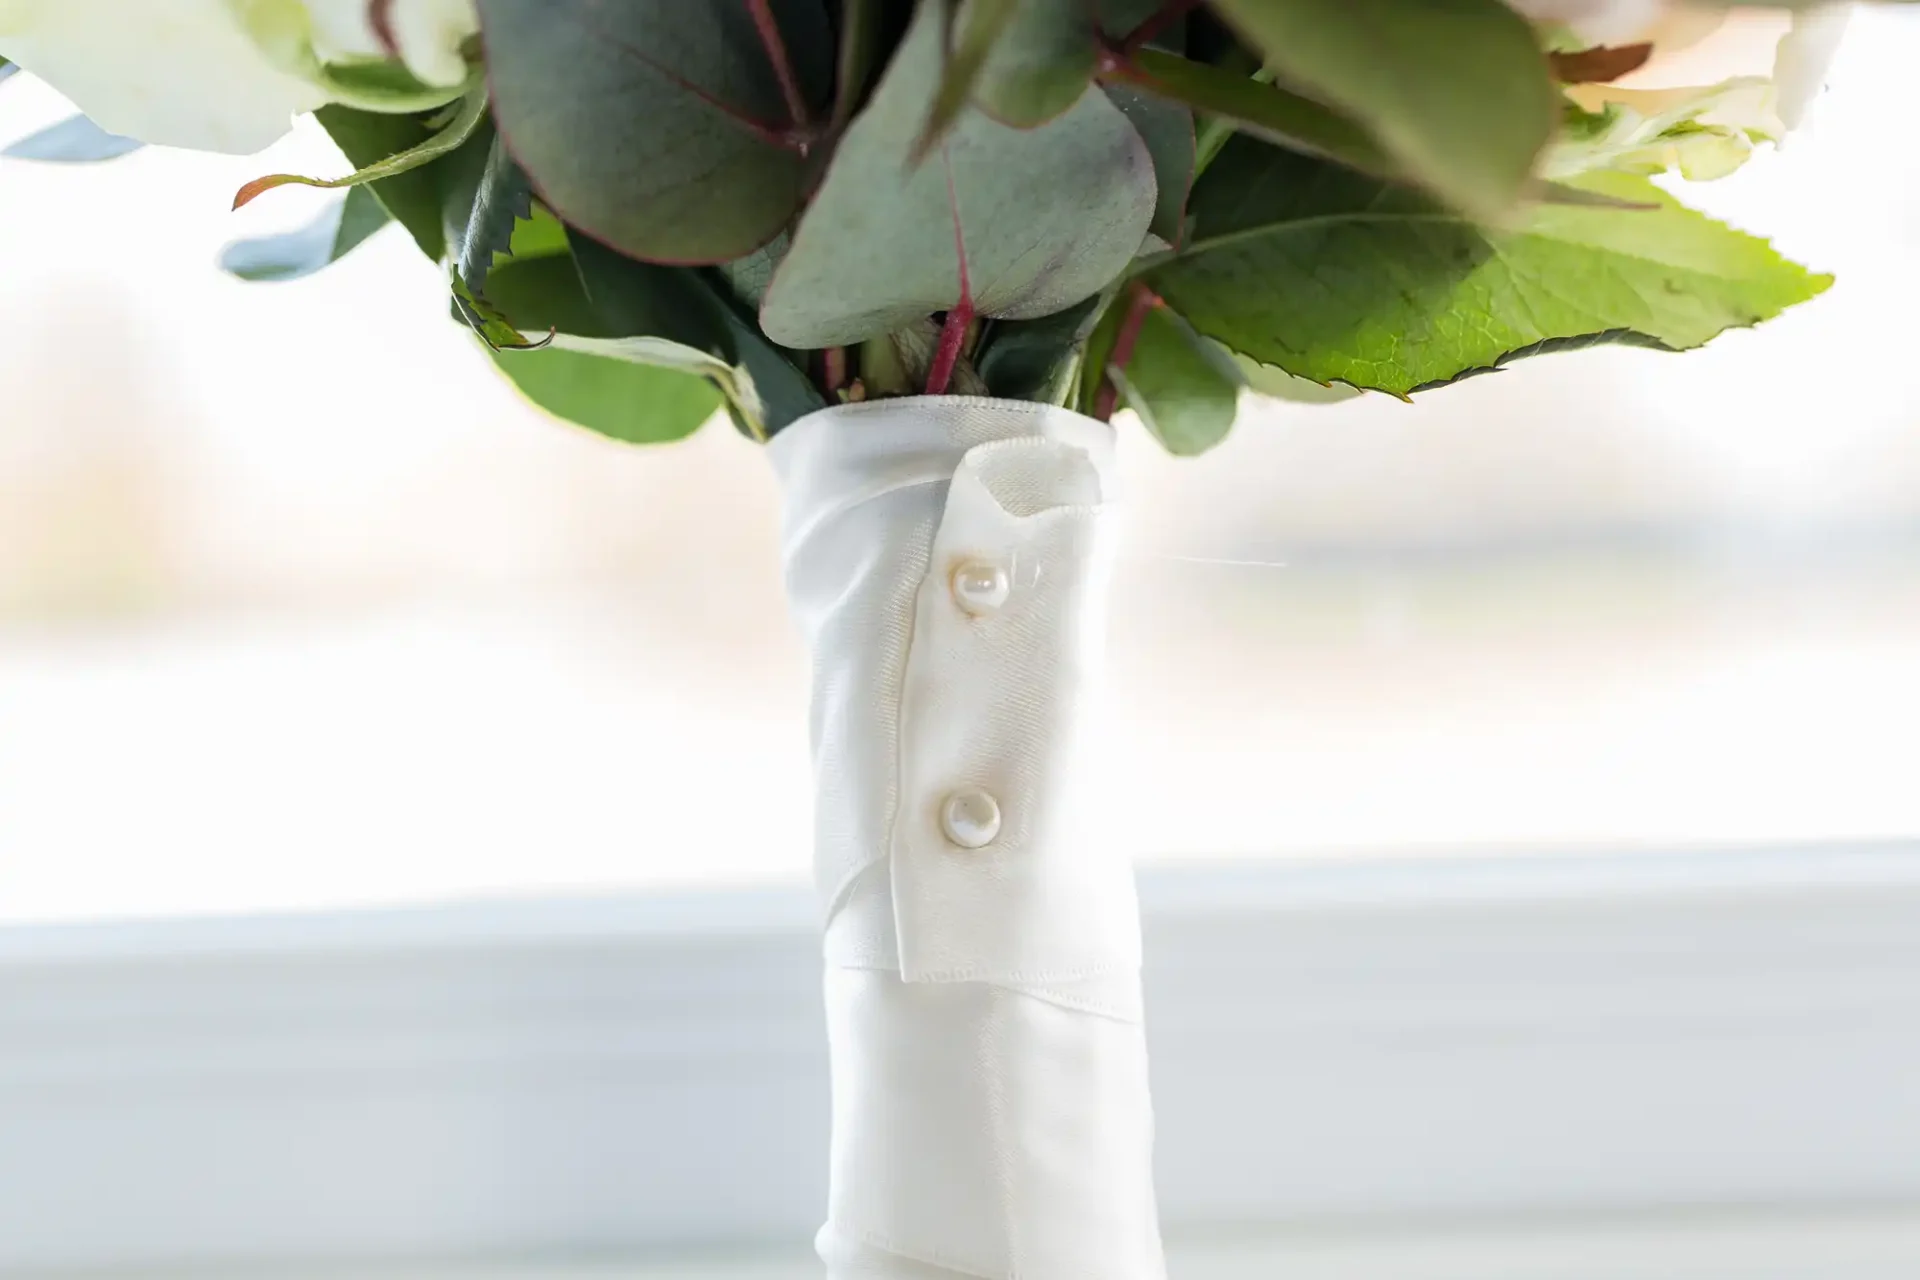 Bouquet of flowers with stems wrapped in a white fabric featuring button details, set against a softly blurred background.